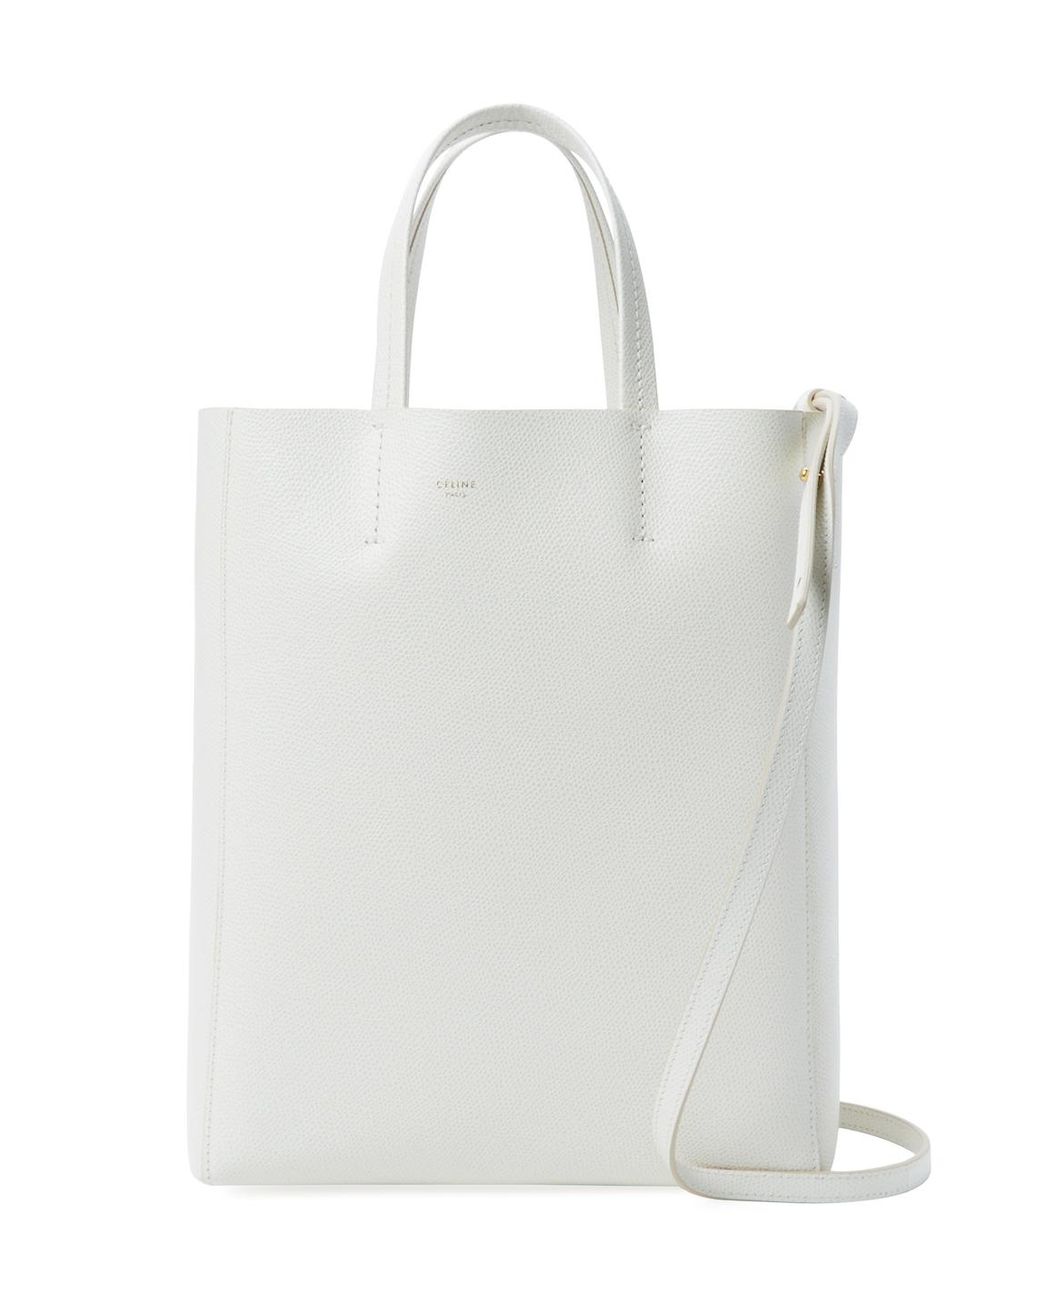 Celine Cabas Small Leather Tote in White | Lyst